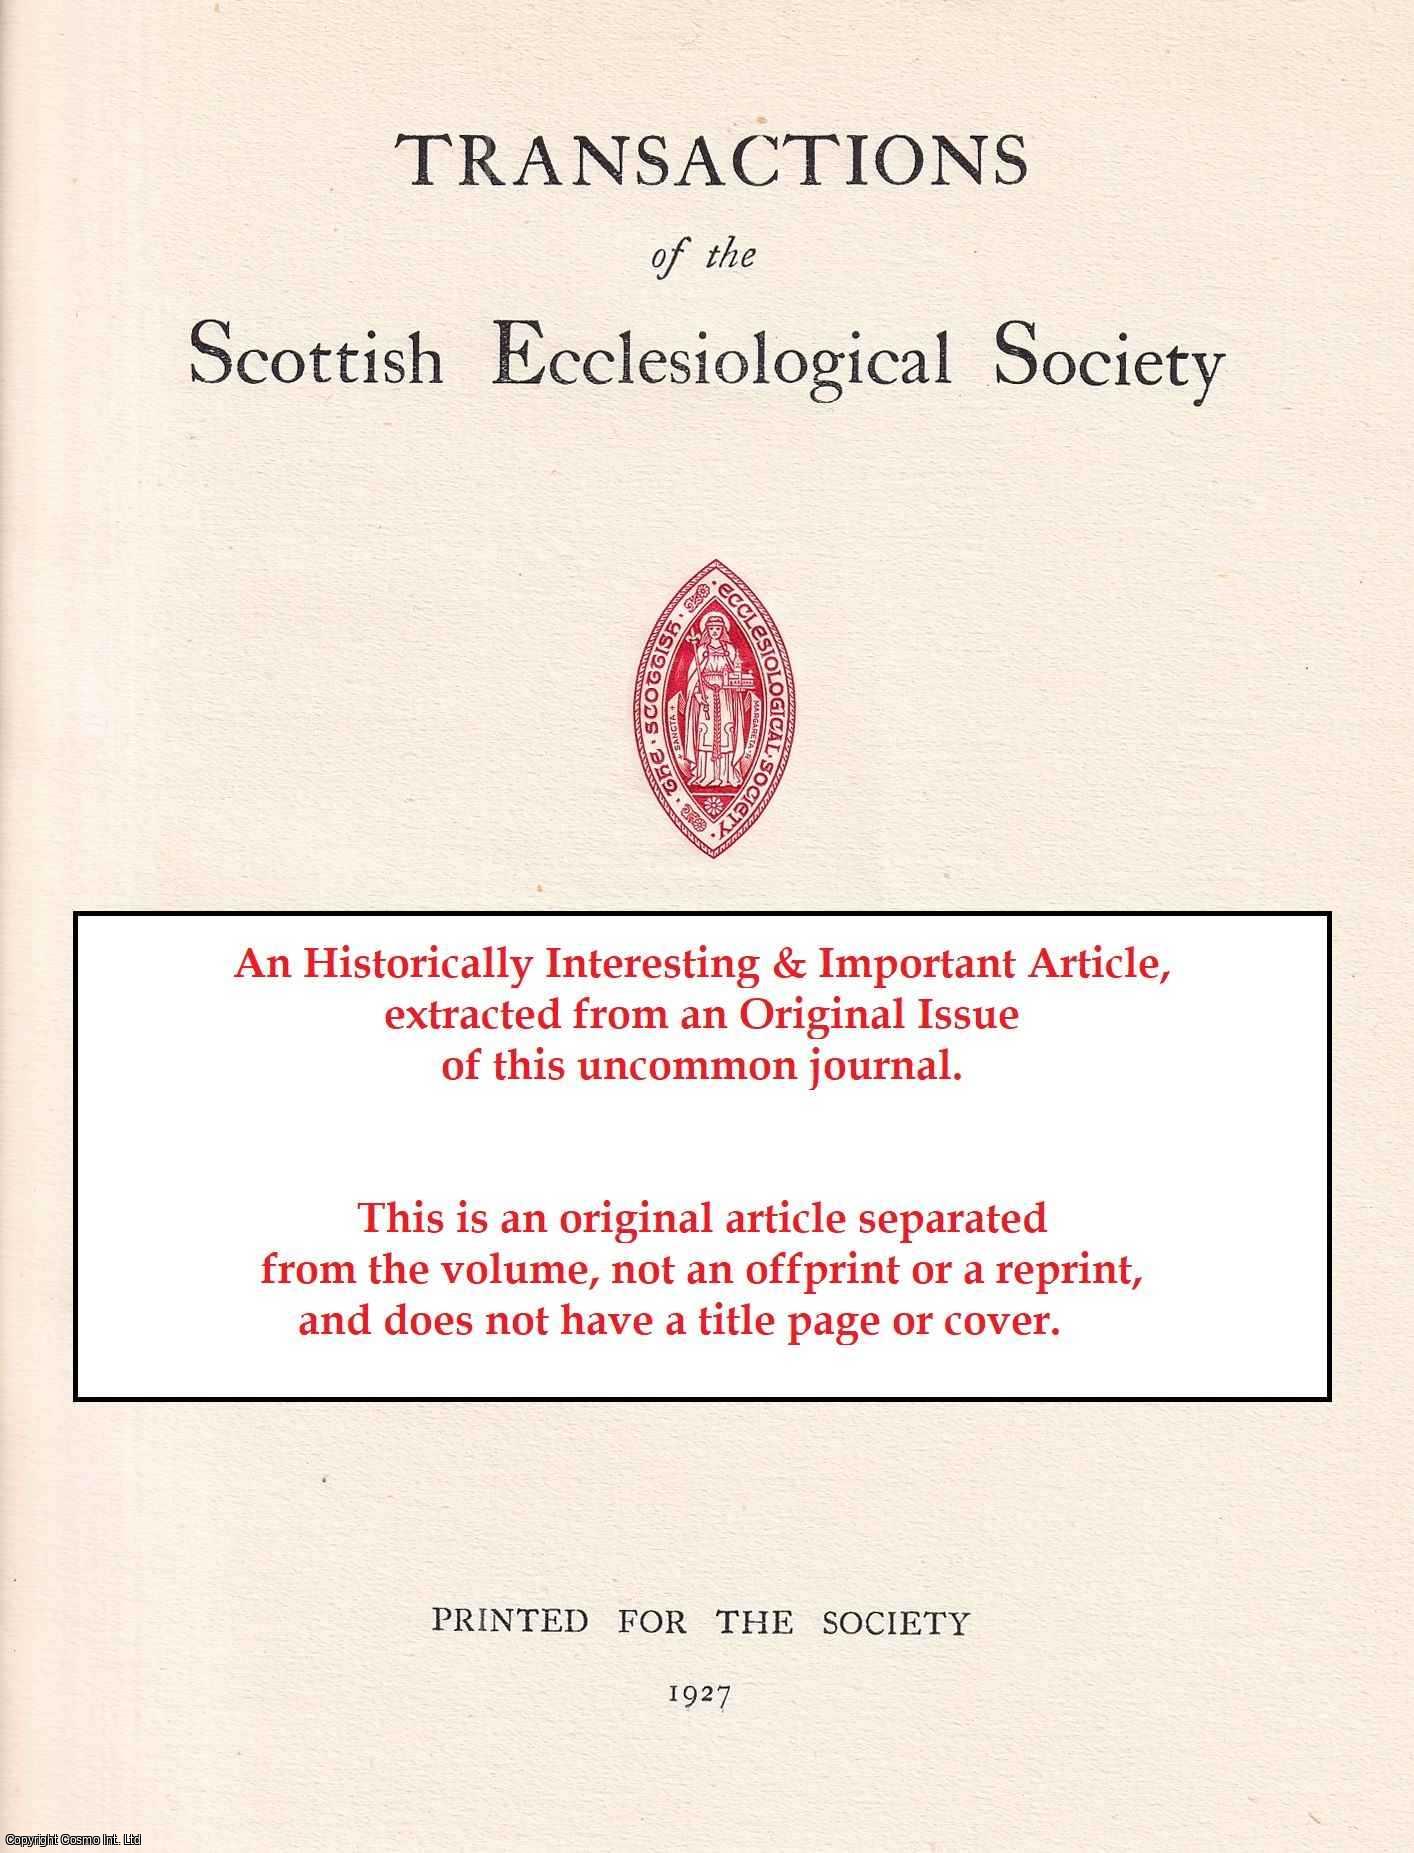 Rt. Rev J.R. Darbyshire - Architecture and Worship. An original article from the Transactions of the Scottish Ecclesiological Society, 1934.